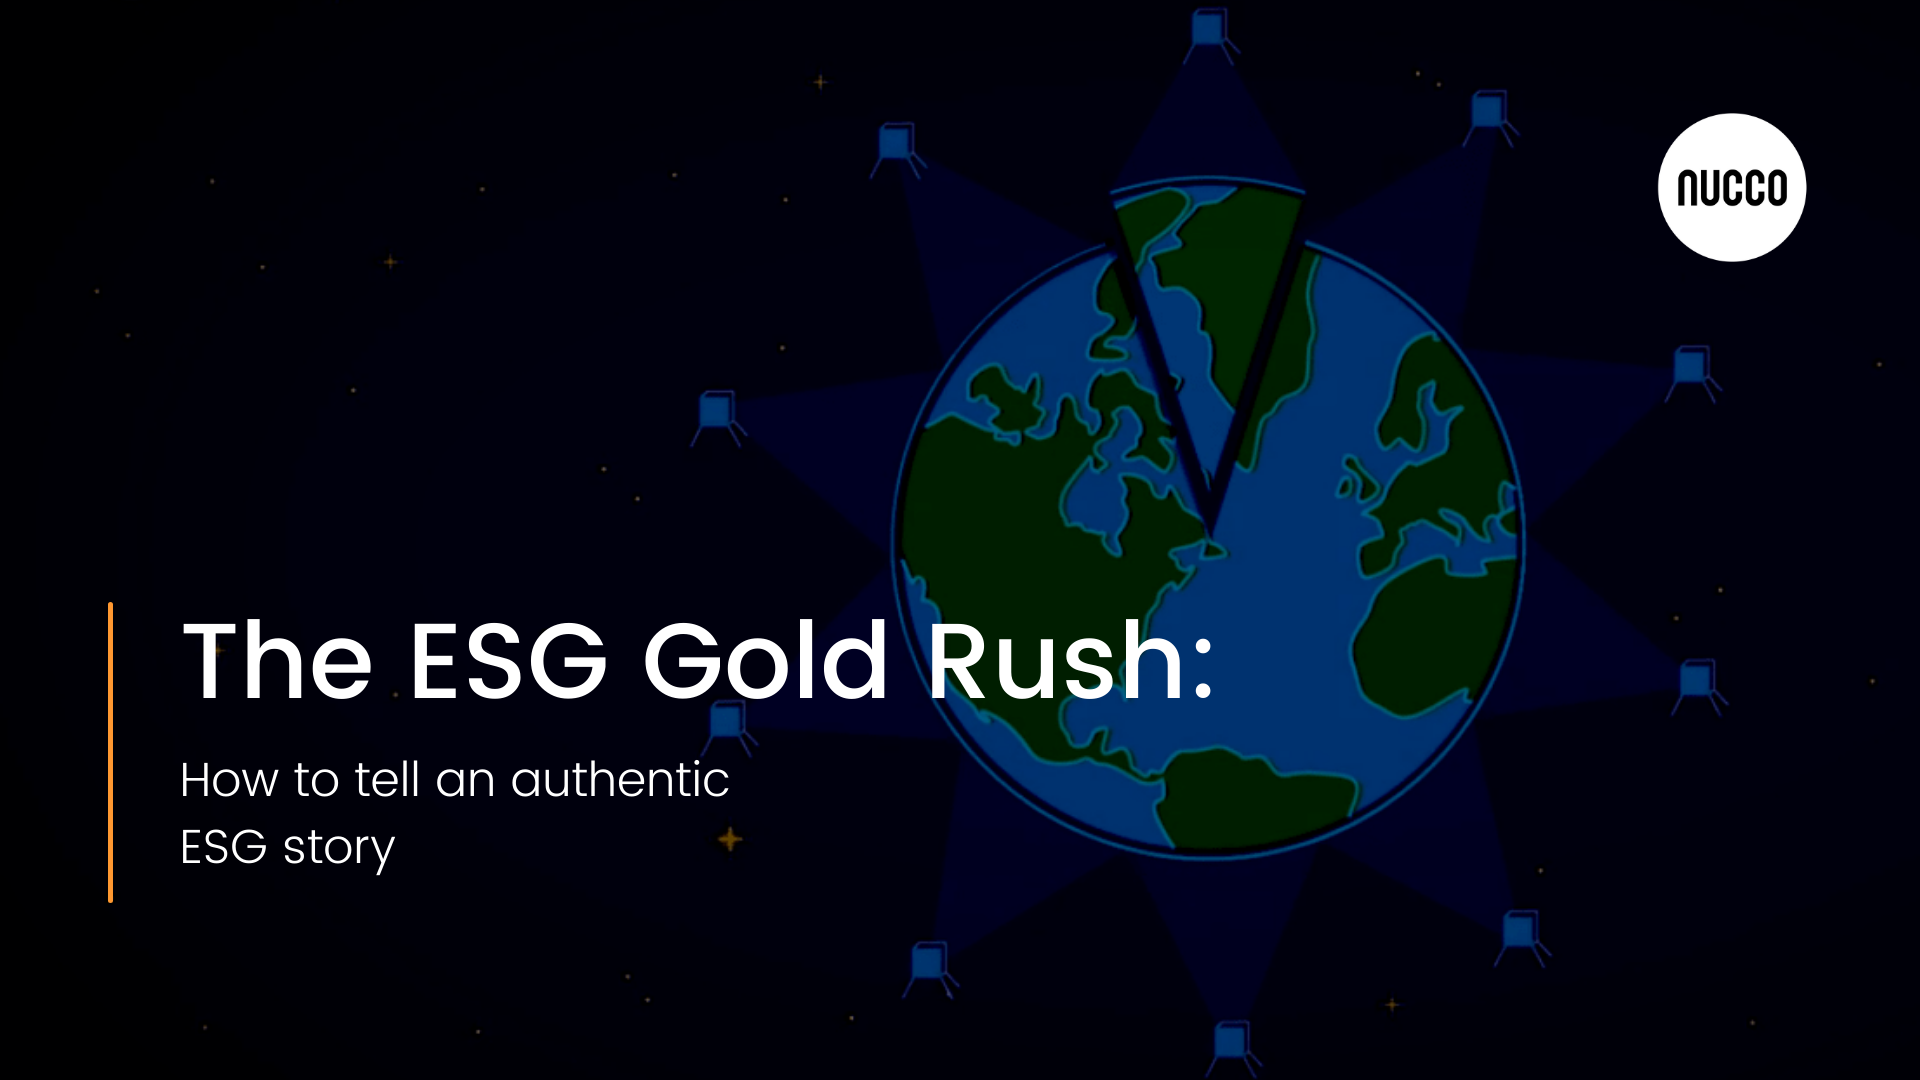 The ESG Gold Rush: How to Tell an Authentic ESG Story